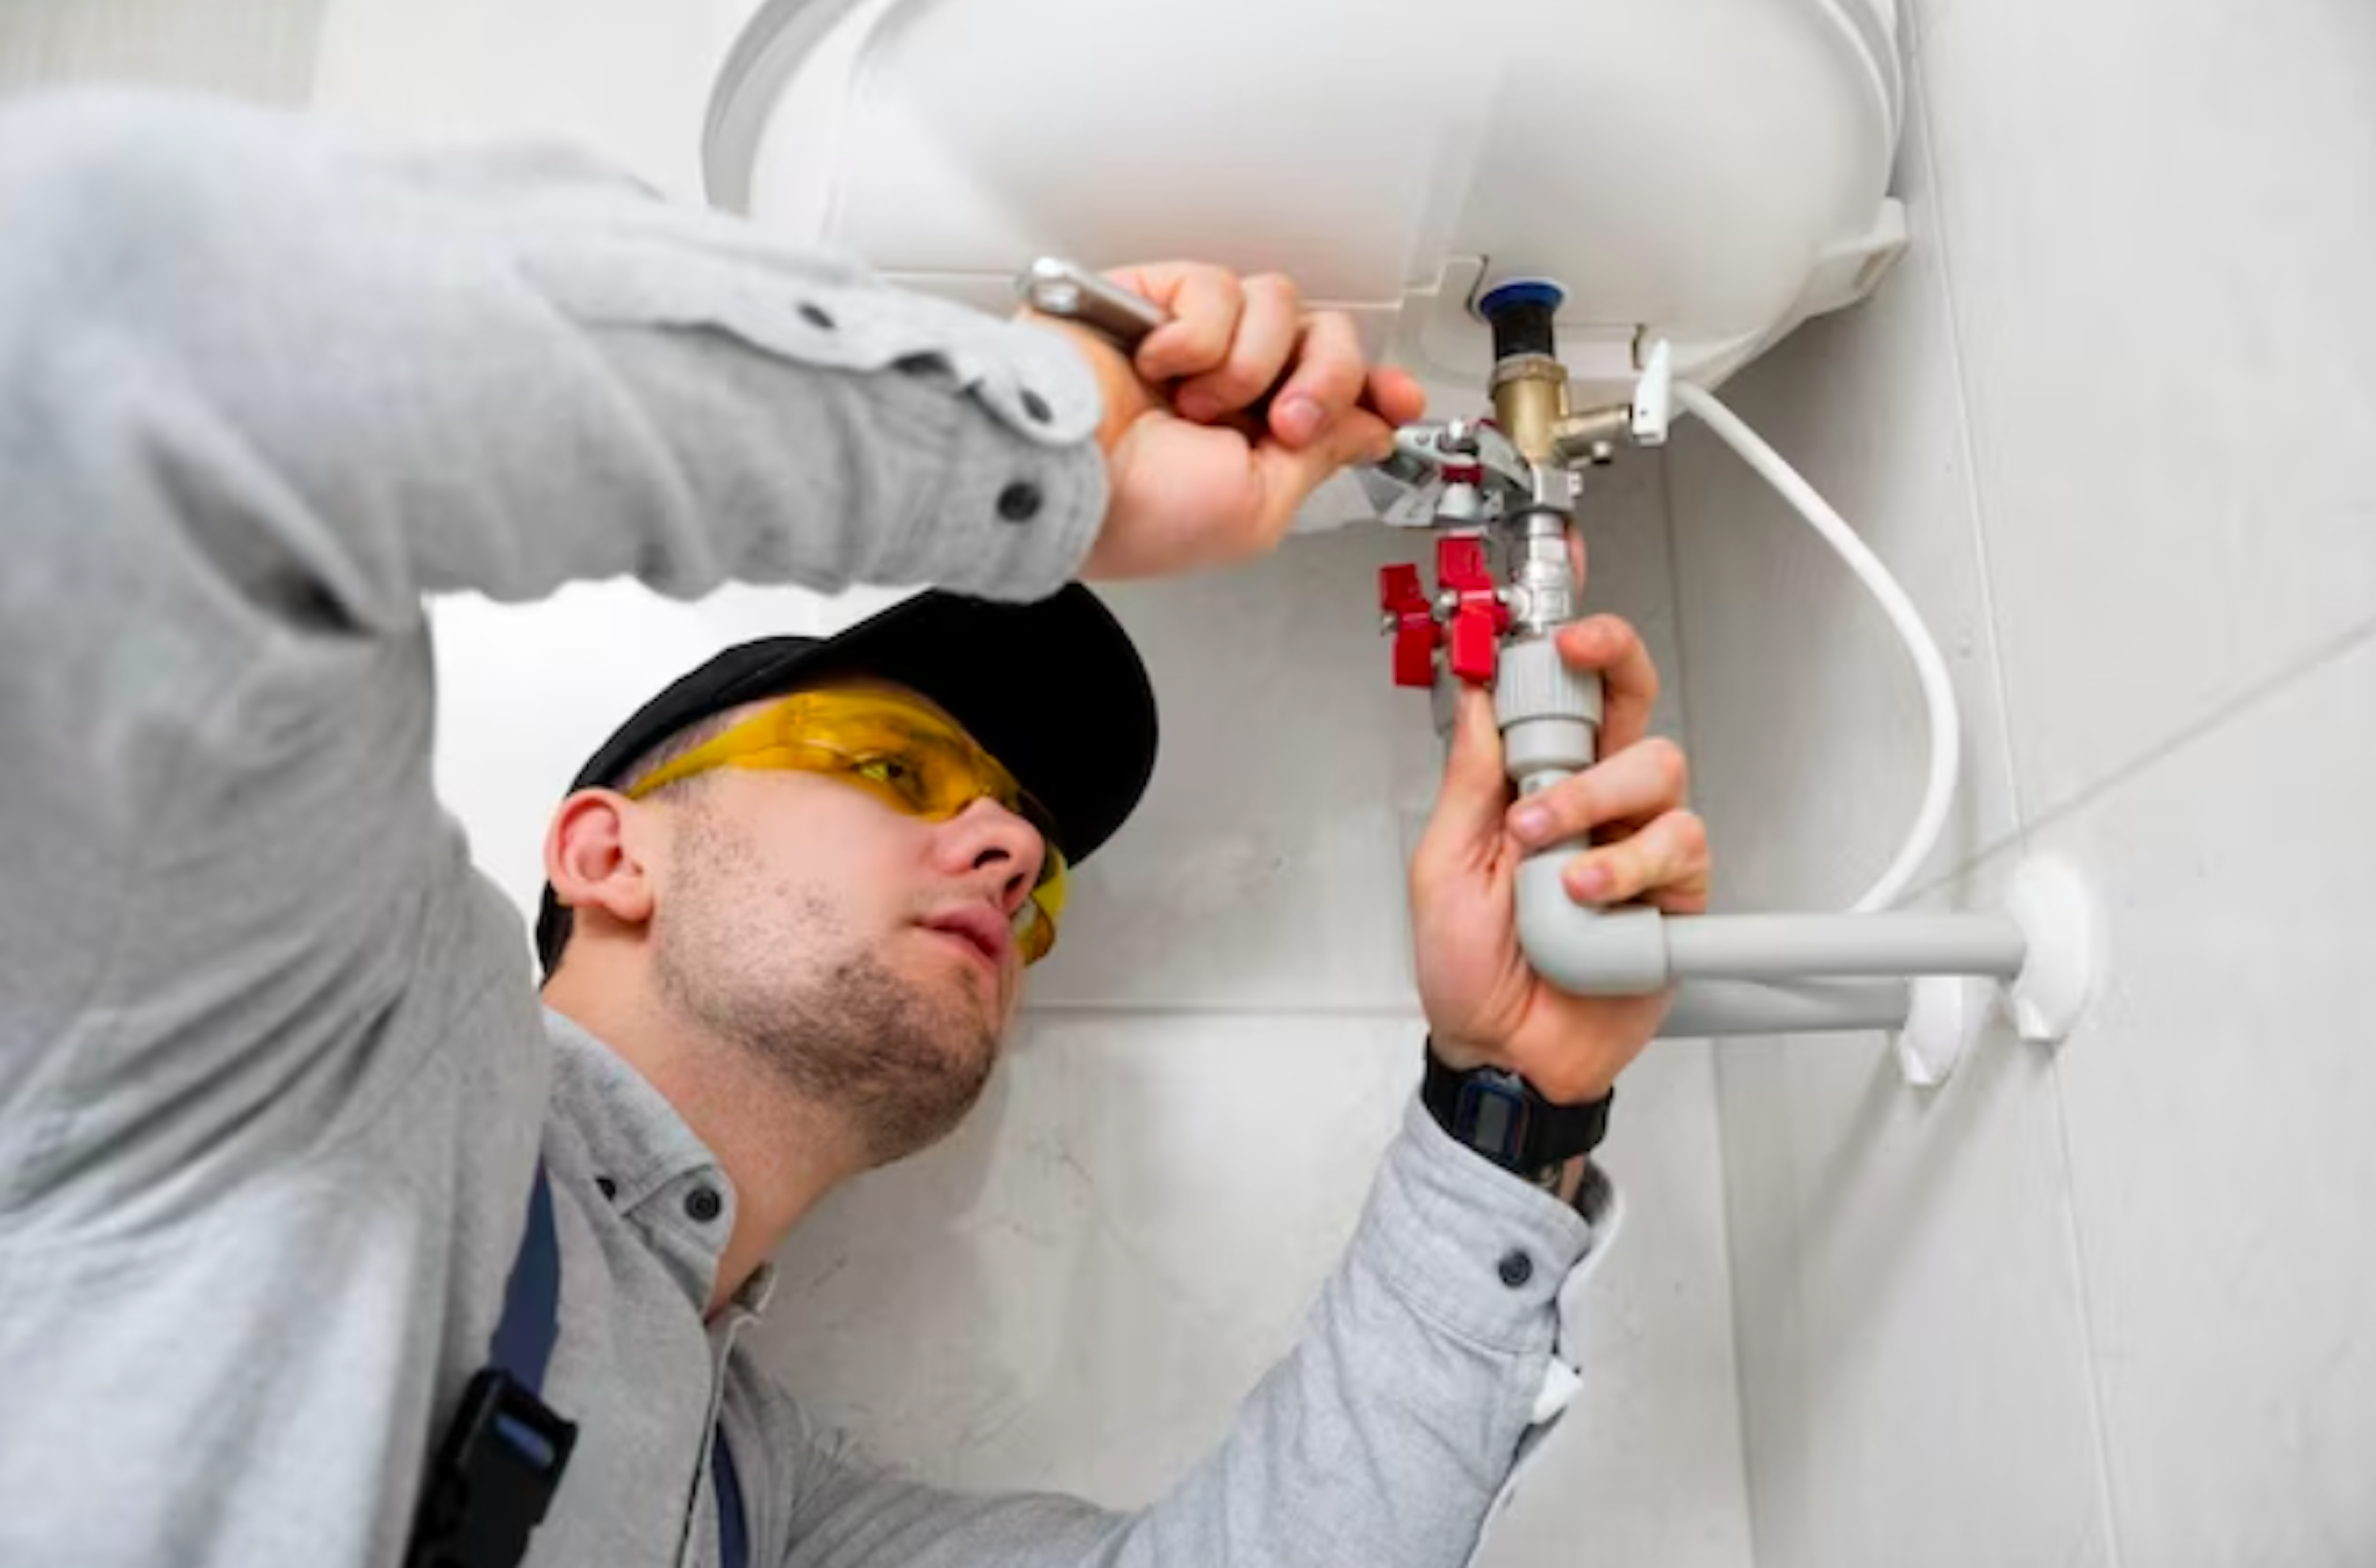 Why are Plumbing Apprenticeships so Popular?